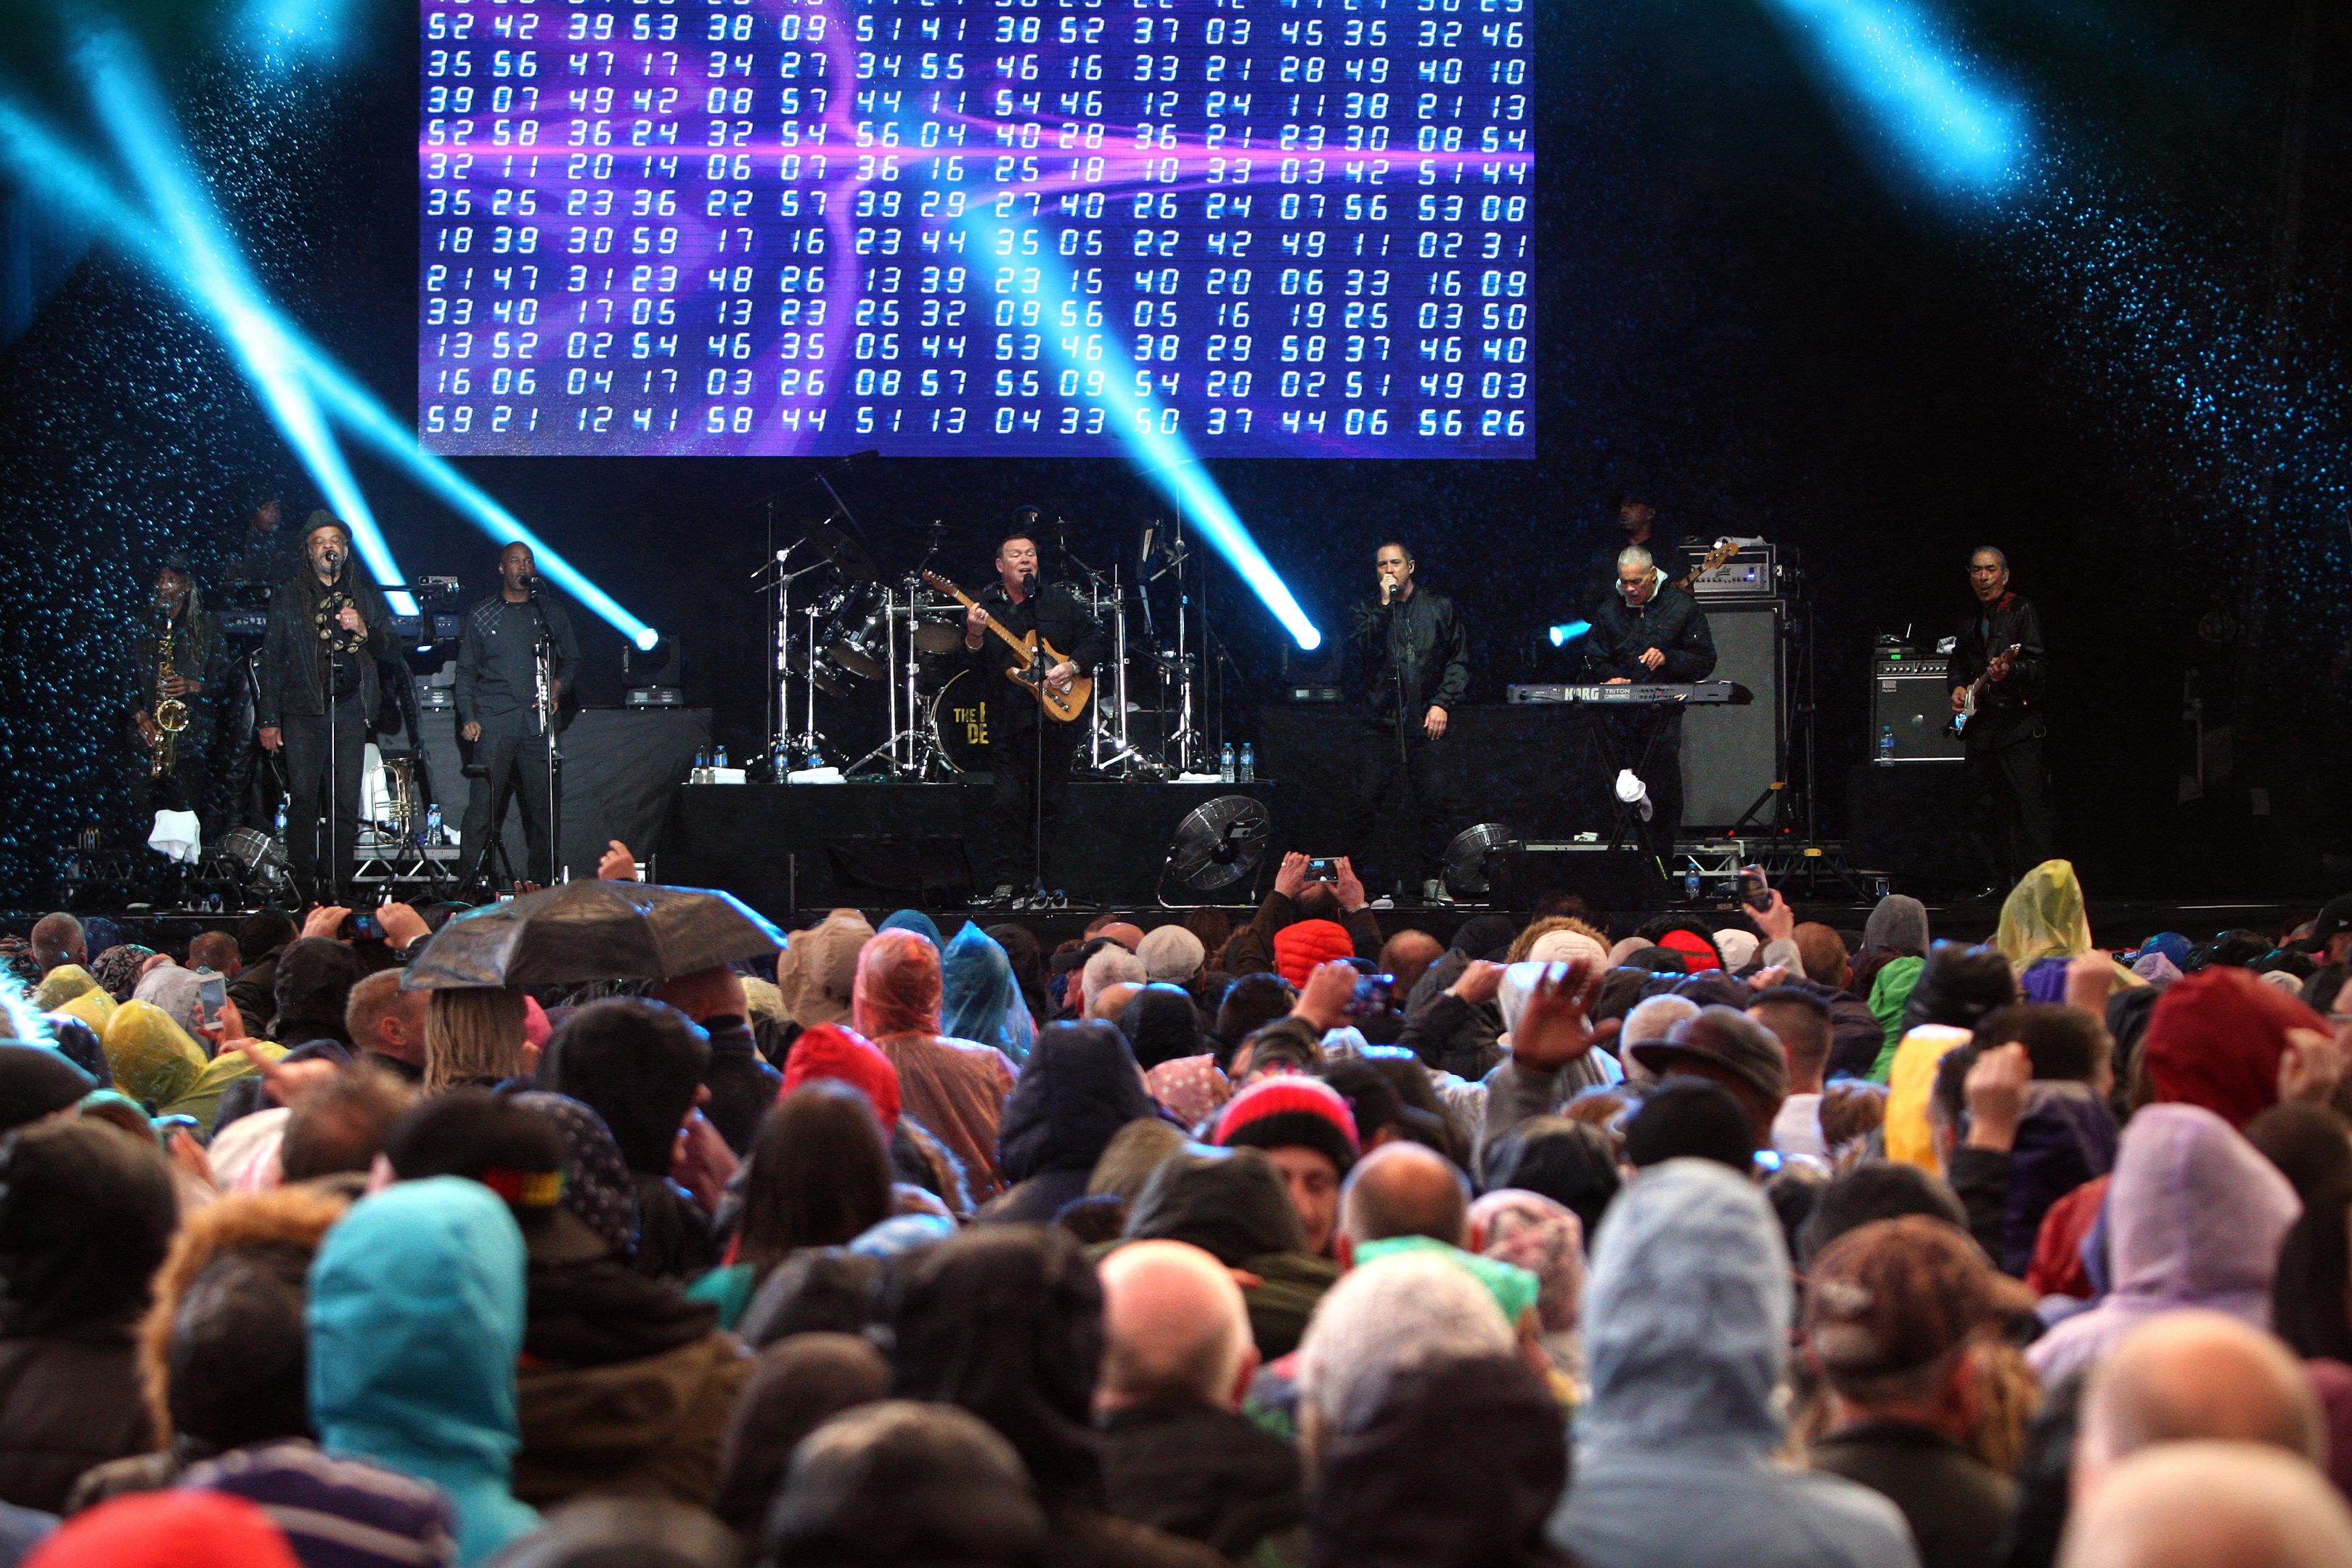 UB40 on stage as fans enjoying the show in rain and shine.